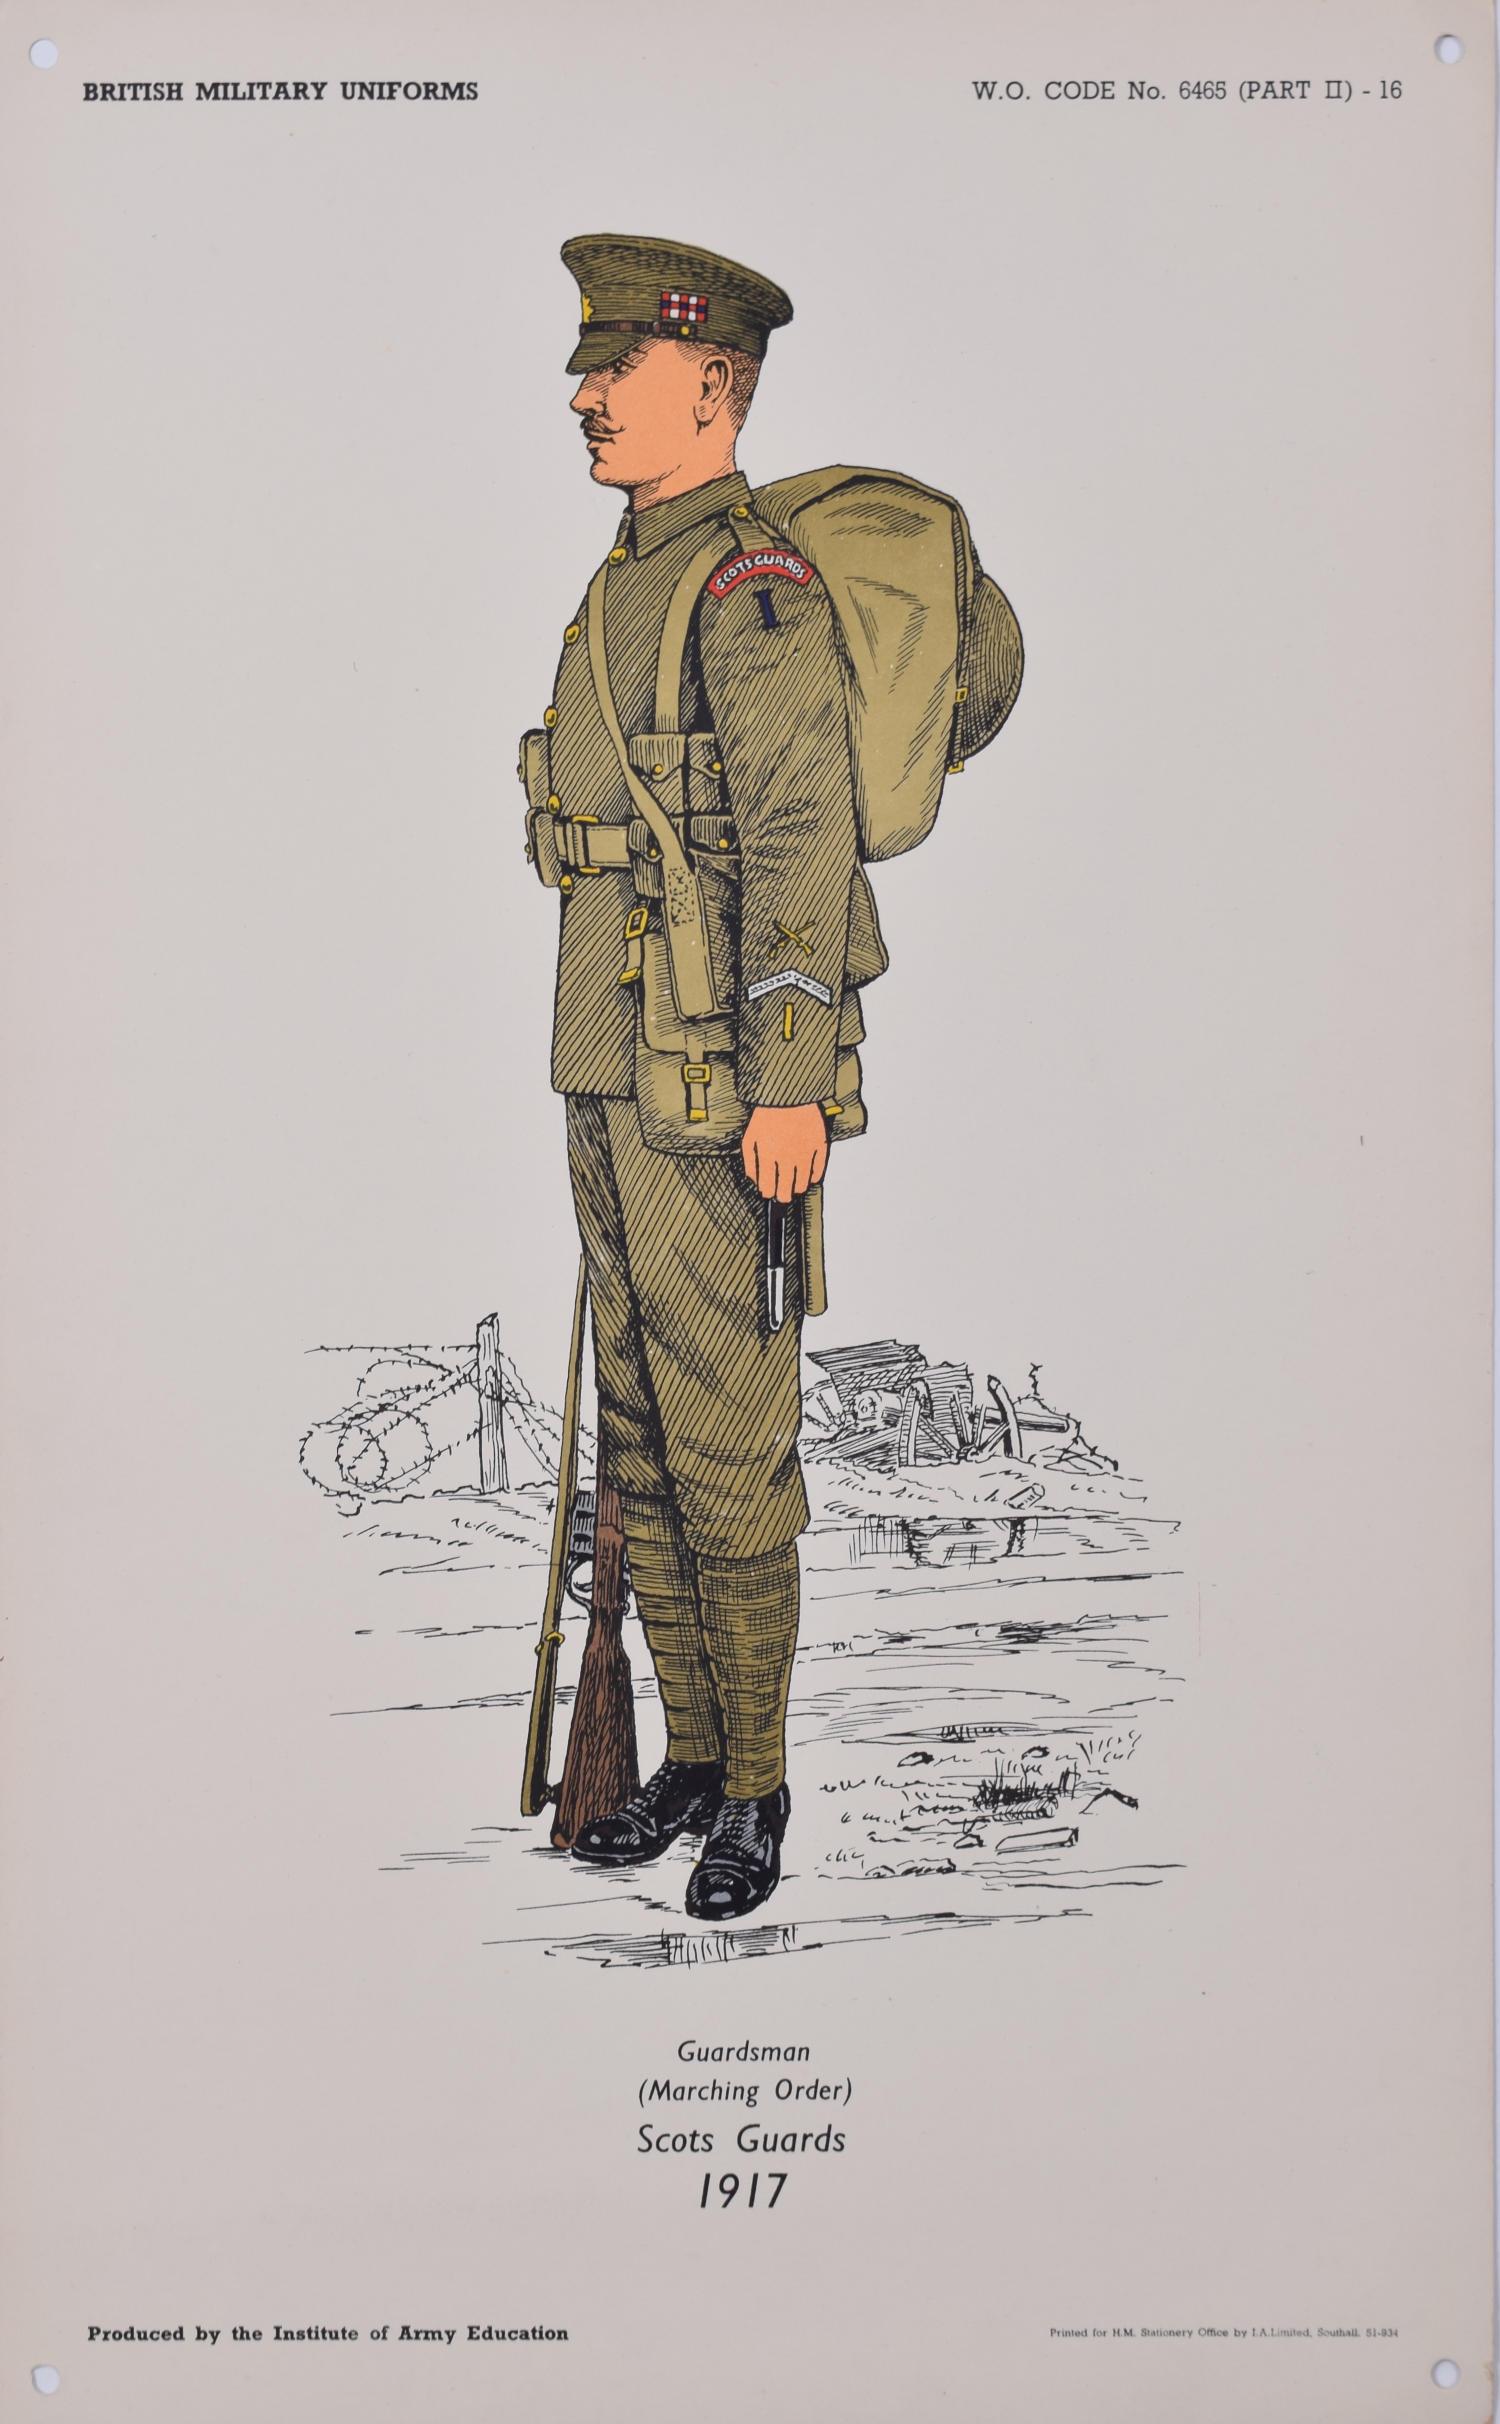 Scots Guards Officer Institute of Army Education, Lithographie der Militäruniform